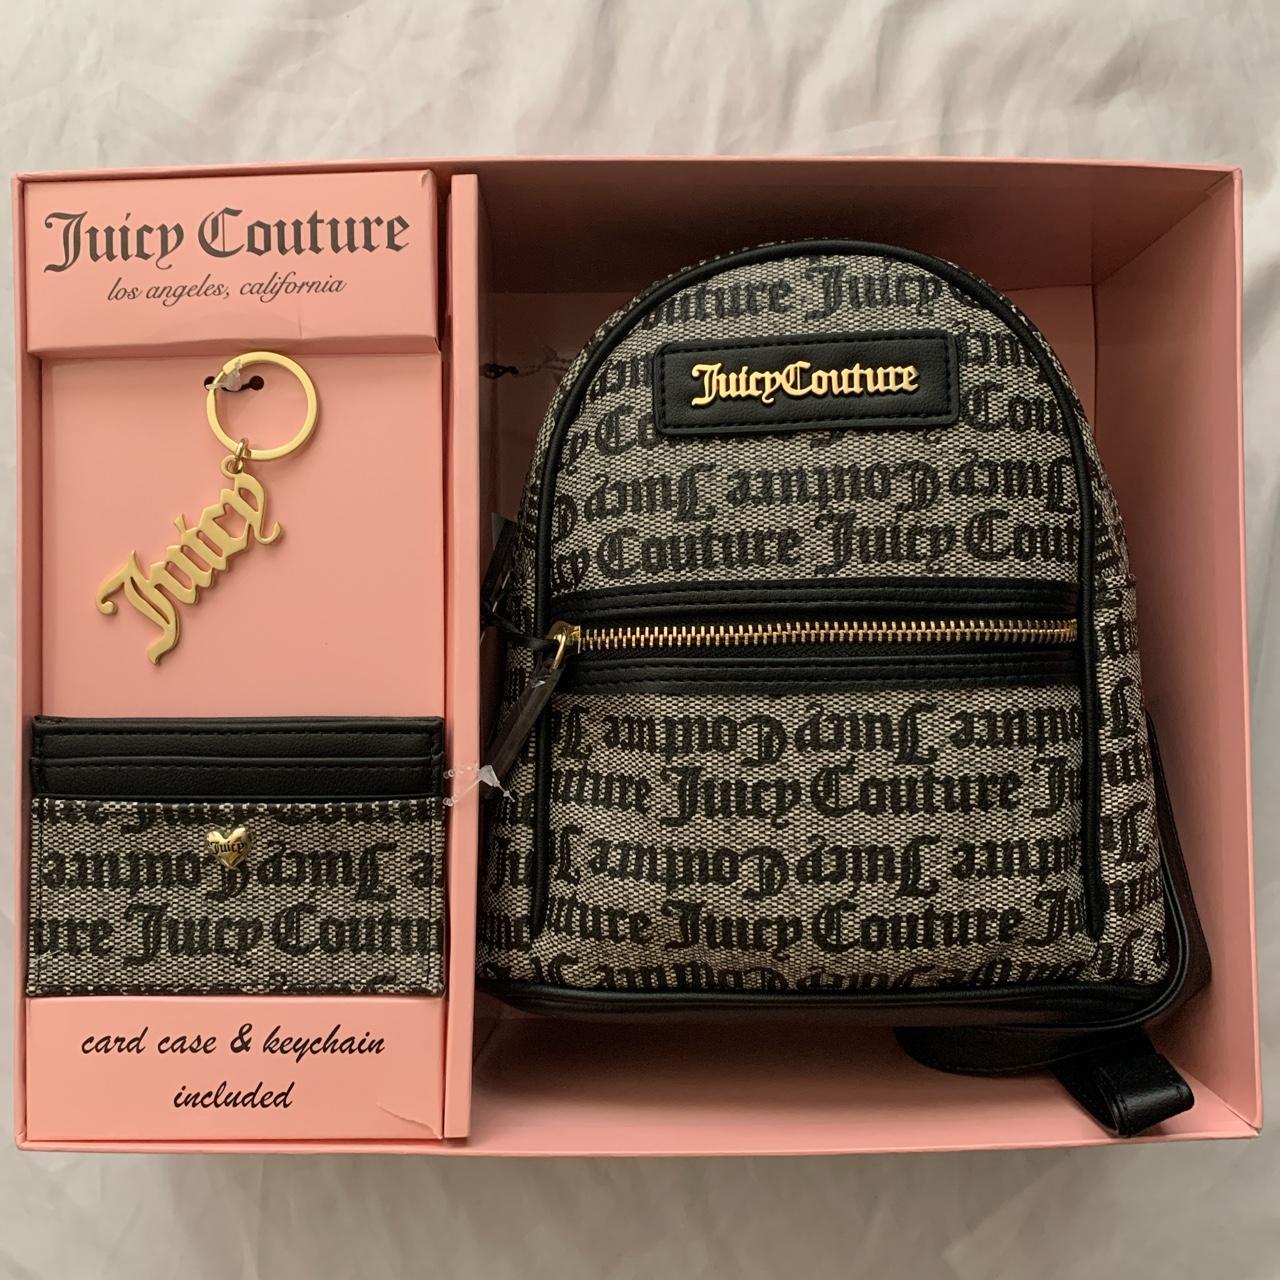 Marc jacobs mini backpack. The nylon is fraying - Depop